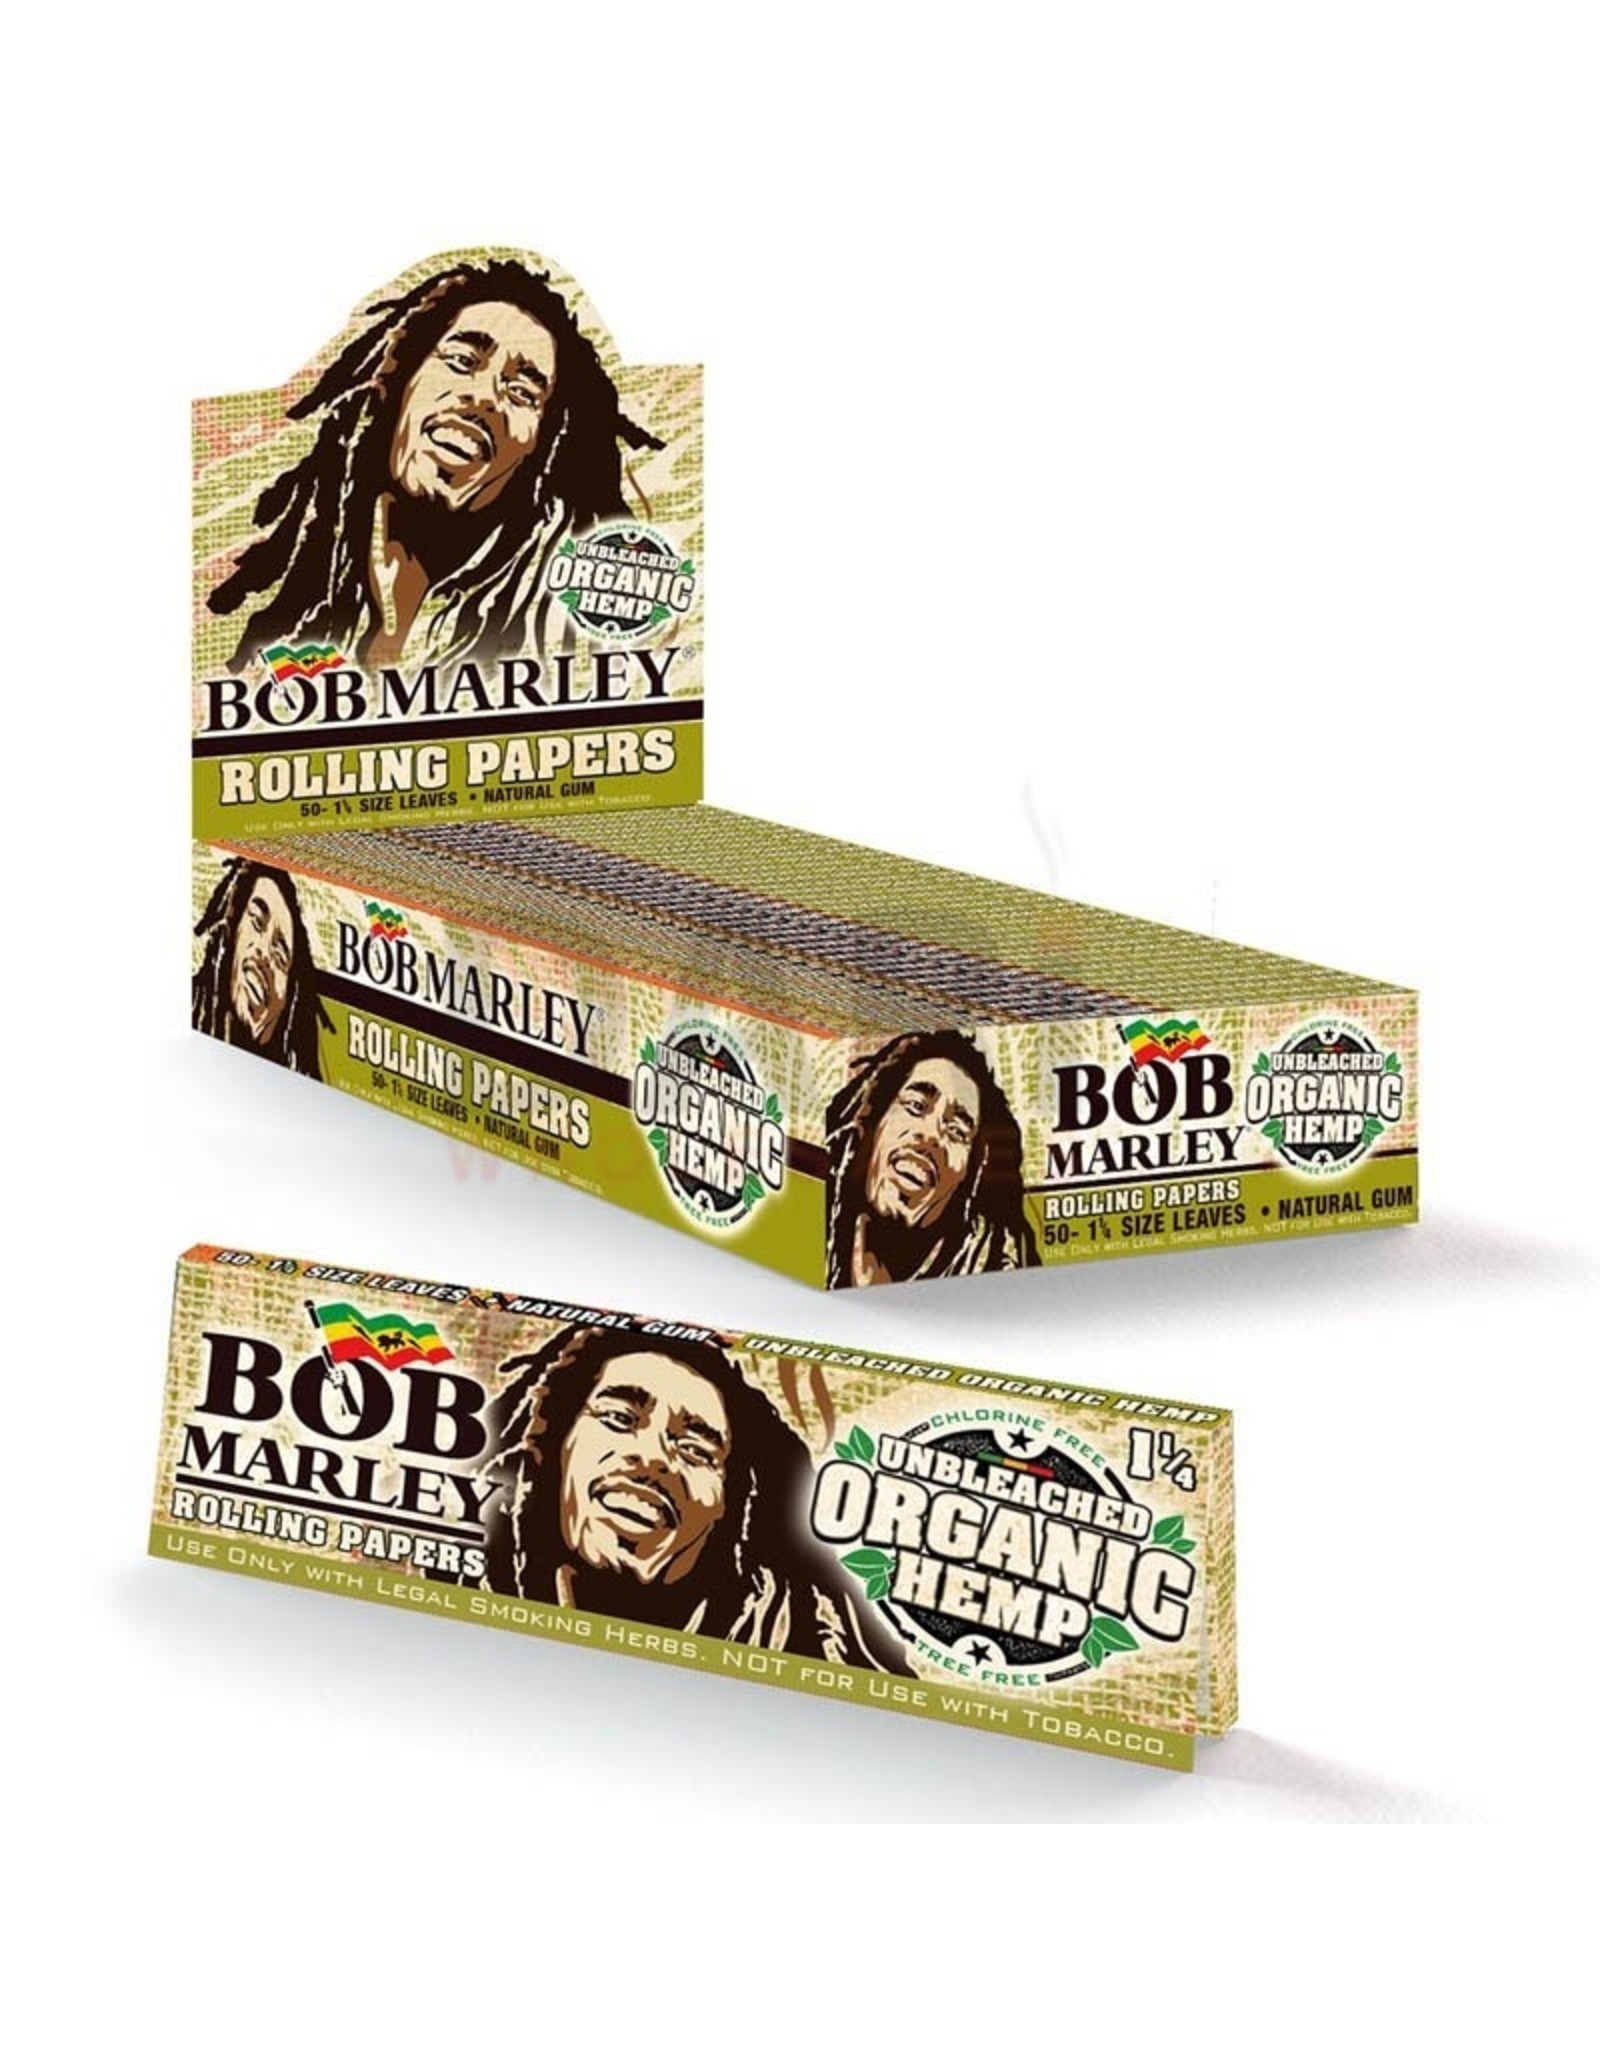 Bob marley rollig papers